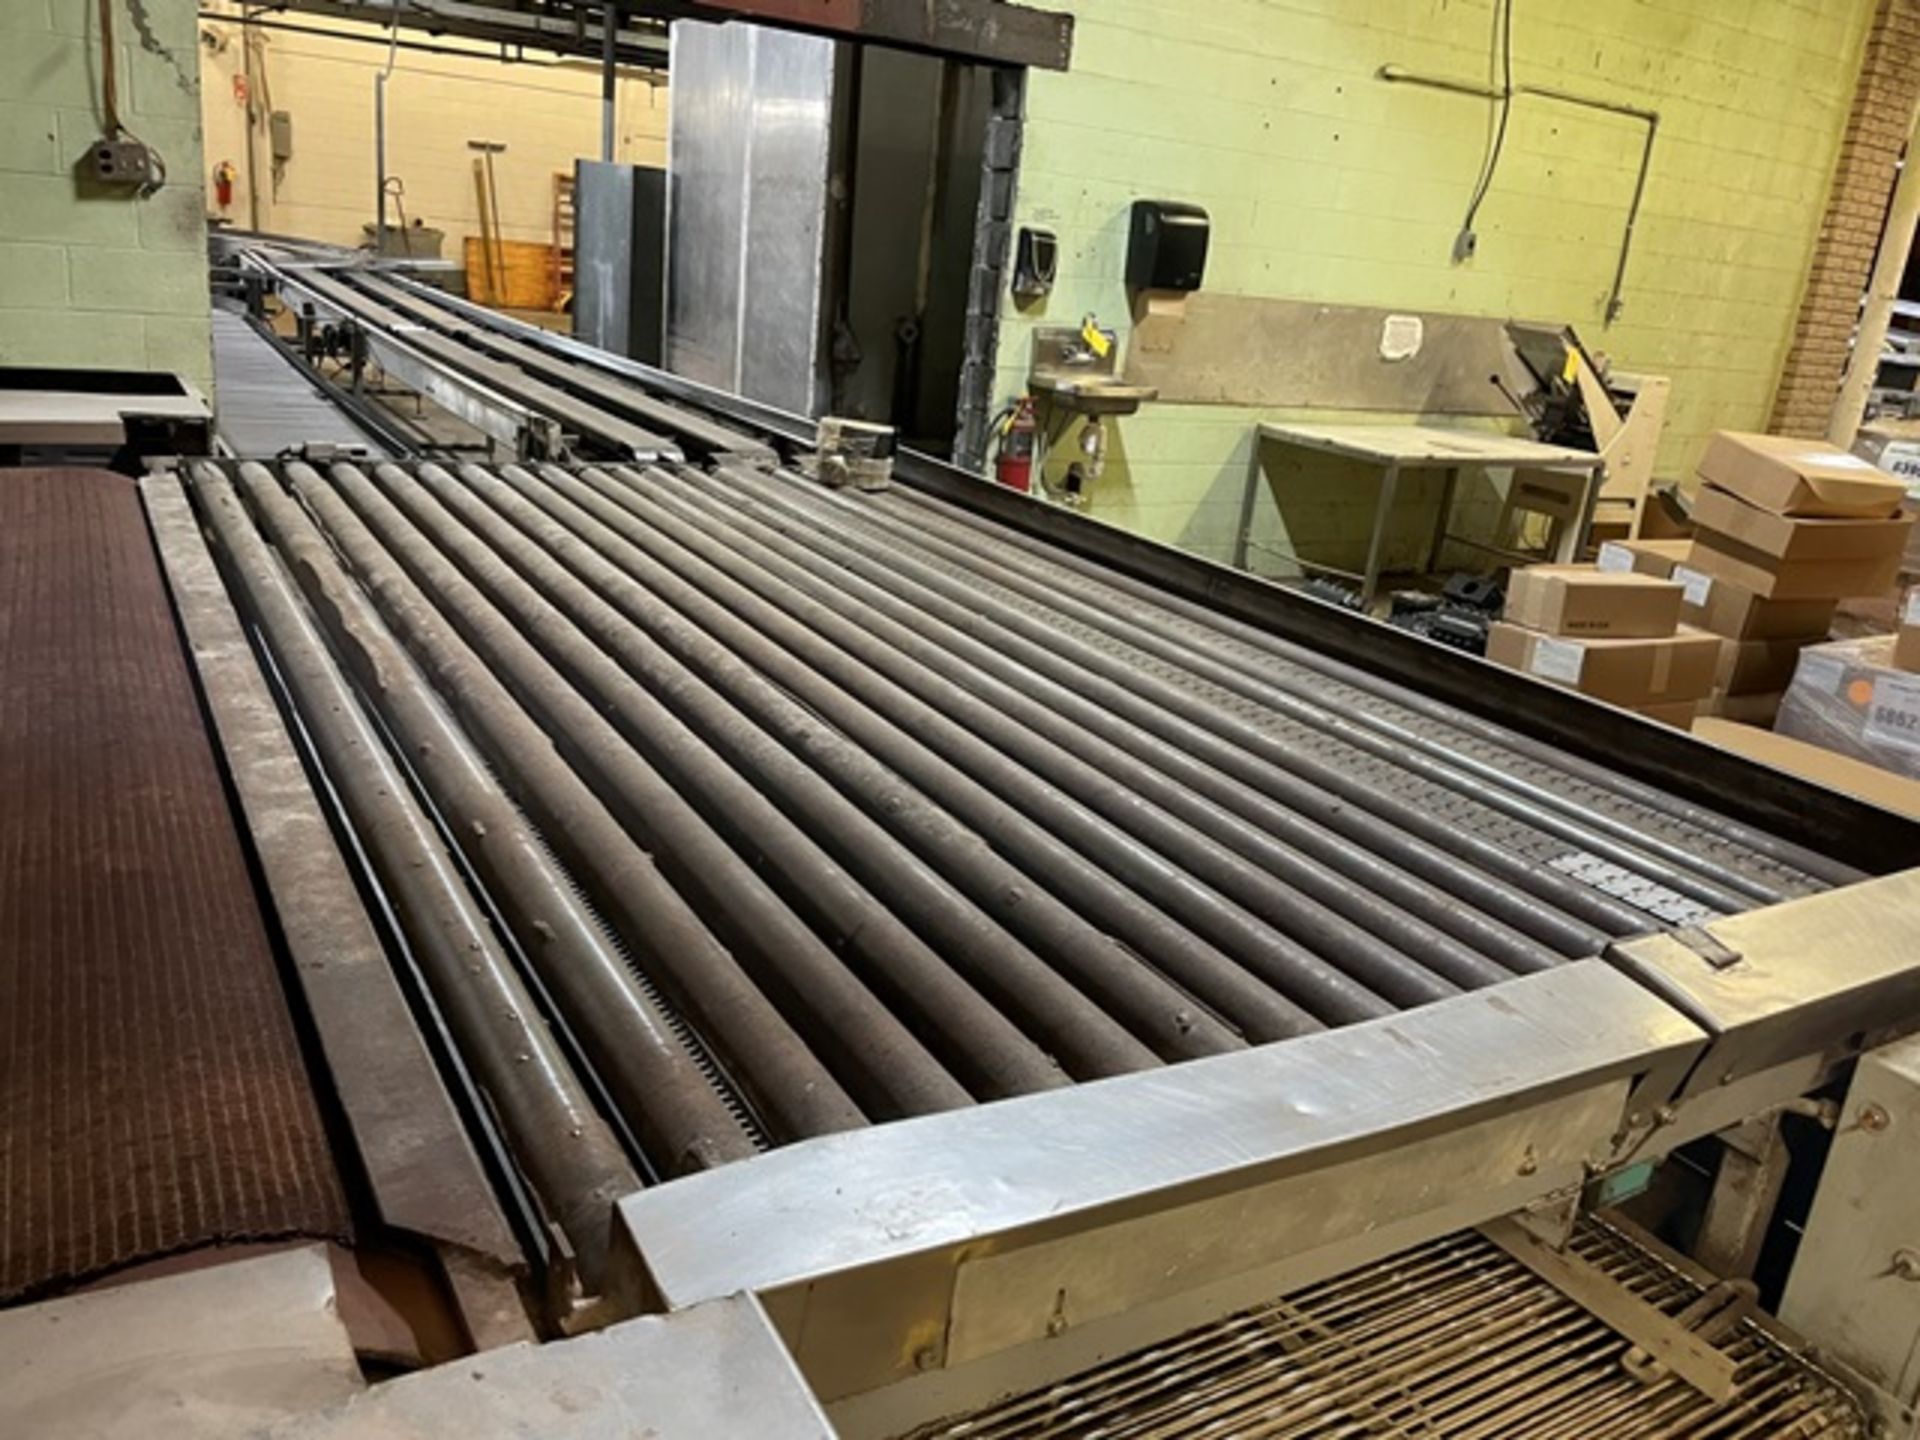 Motorized Oven Offload Roller Conveyor System, Approx. 11' Wide x 8' Length - Image 3 of 3